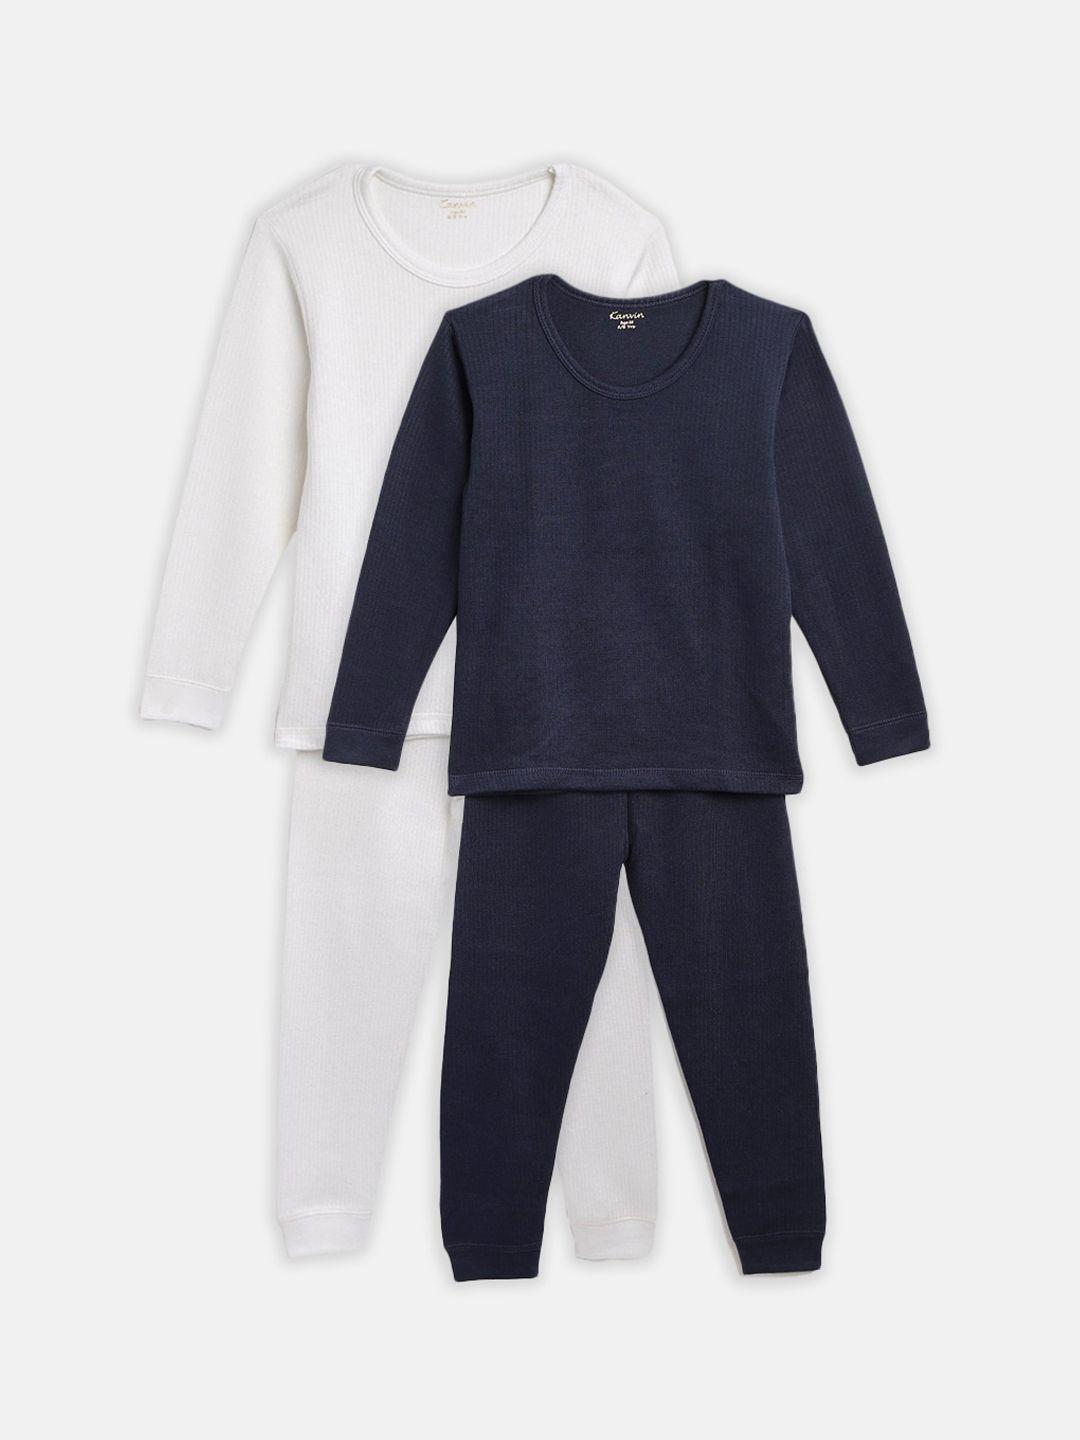 kanvin-boys-white-&-navy-blue-pack-of-2-solid-thermal-set